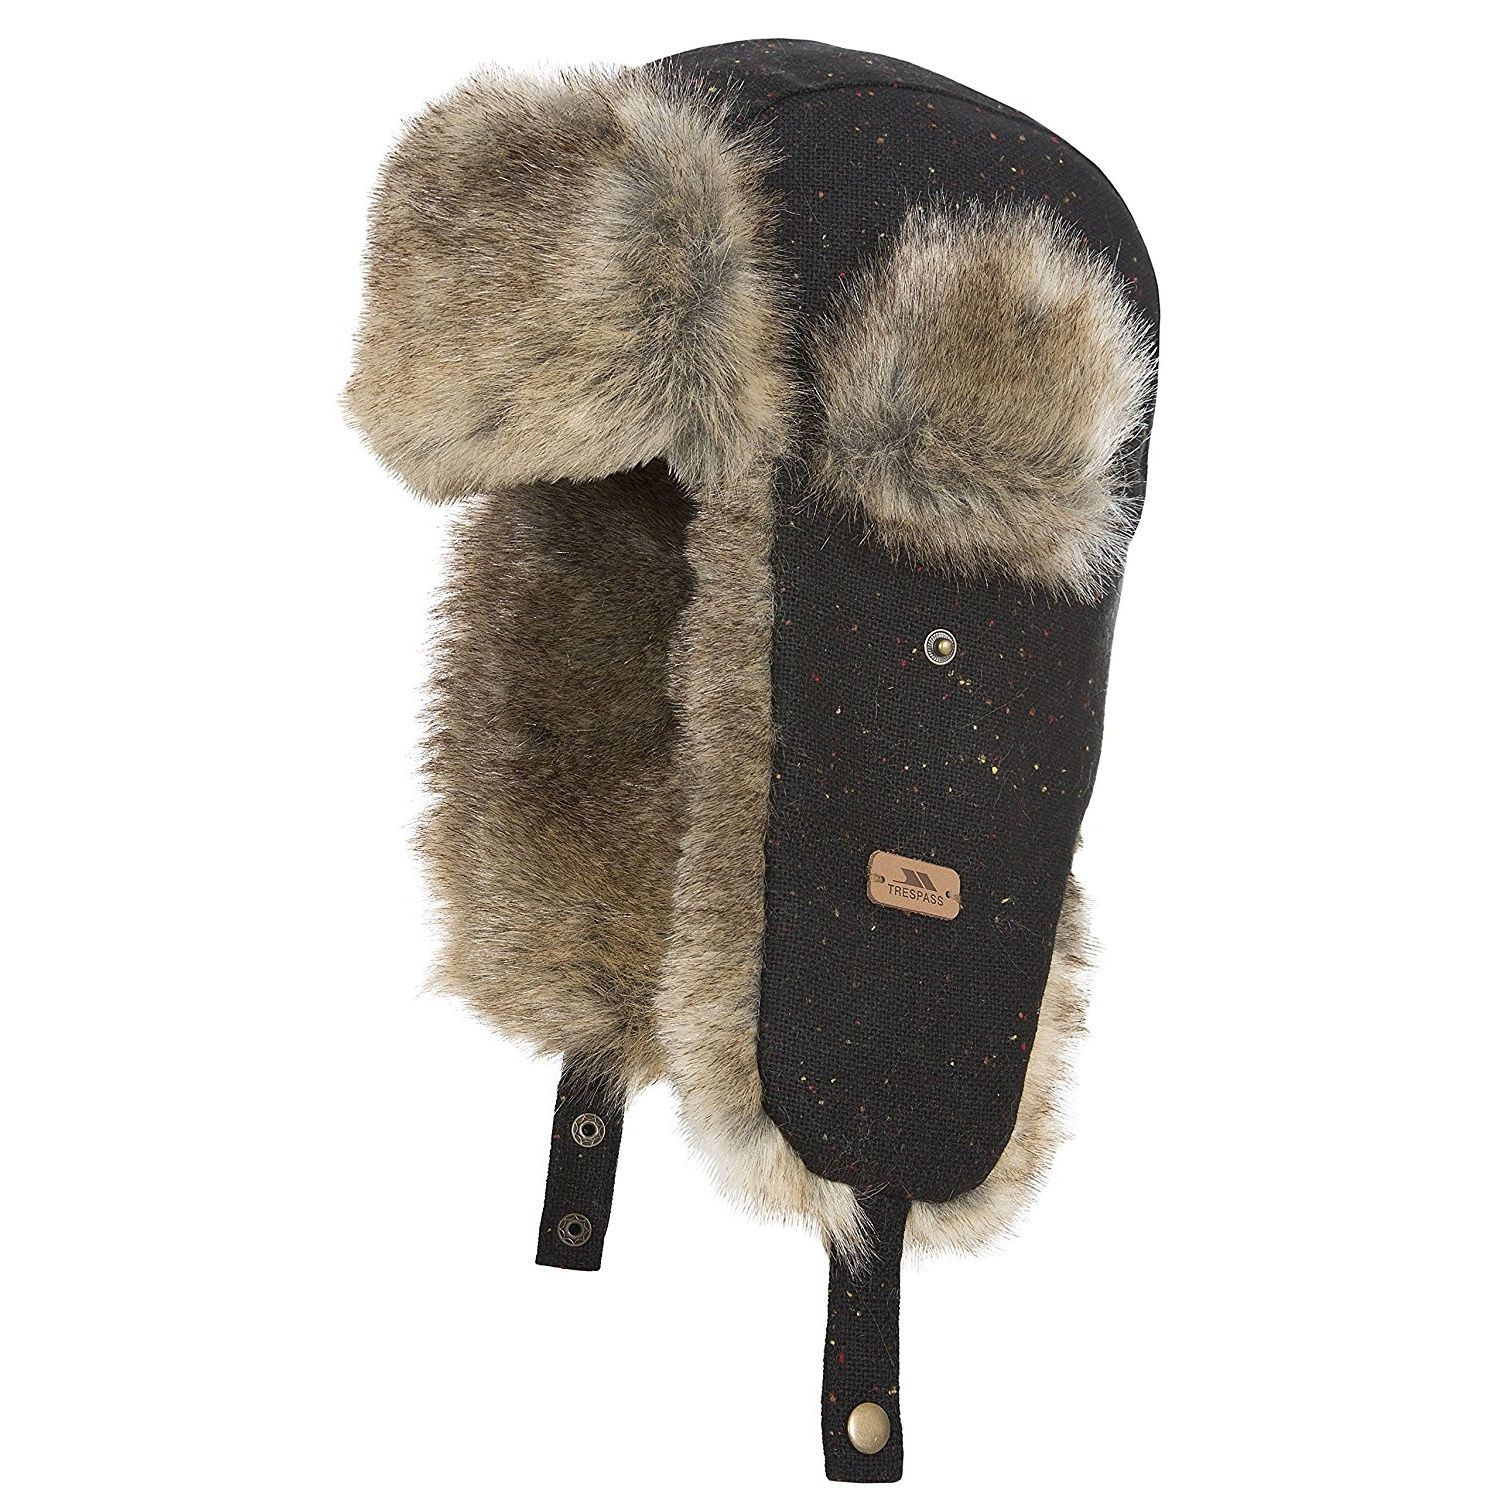 When the winter weather is in full swing, make sure you have the Bellfield mens trapper hat at your disposal to help battle the cold. Trapper hat with faux fur trim and lining. Adjustable fastening.